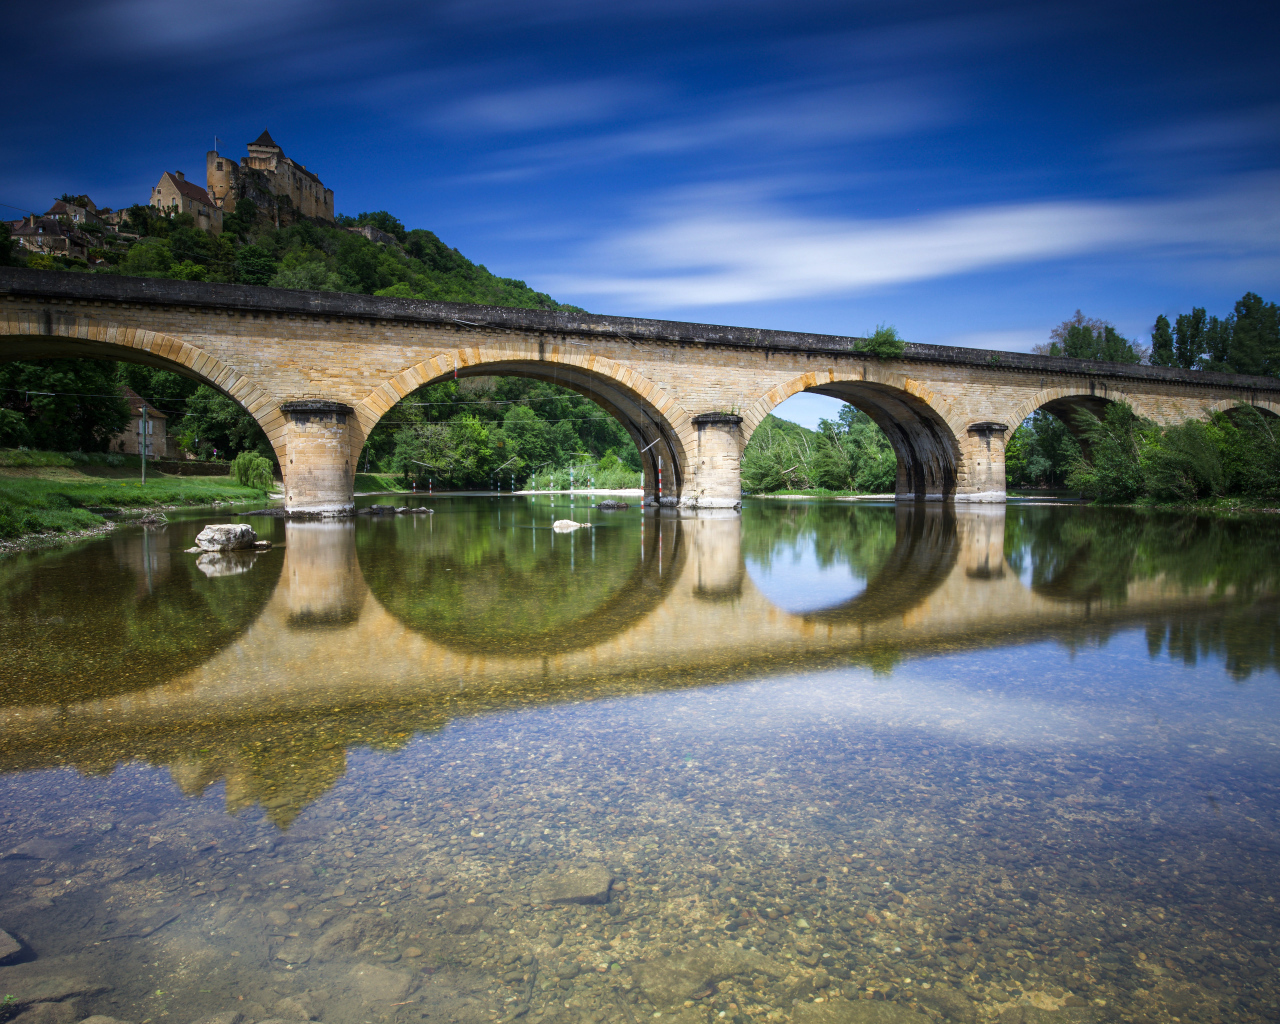 The bridge at the ancient fortress of Castelnau, France